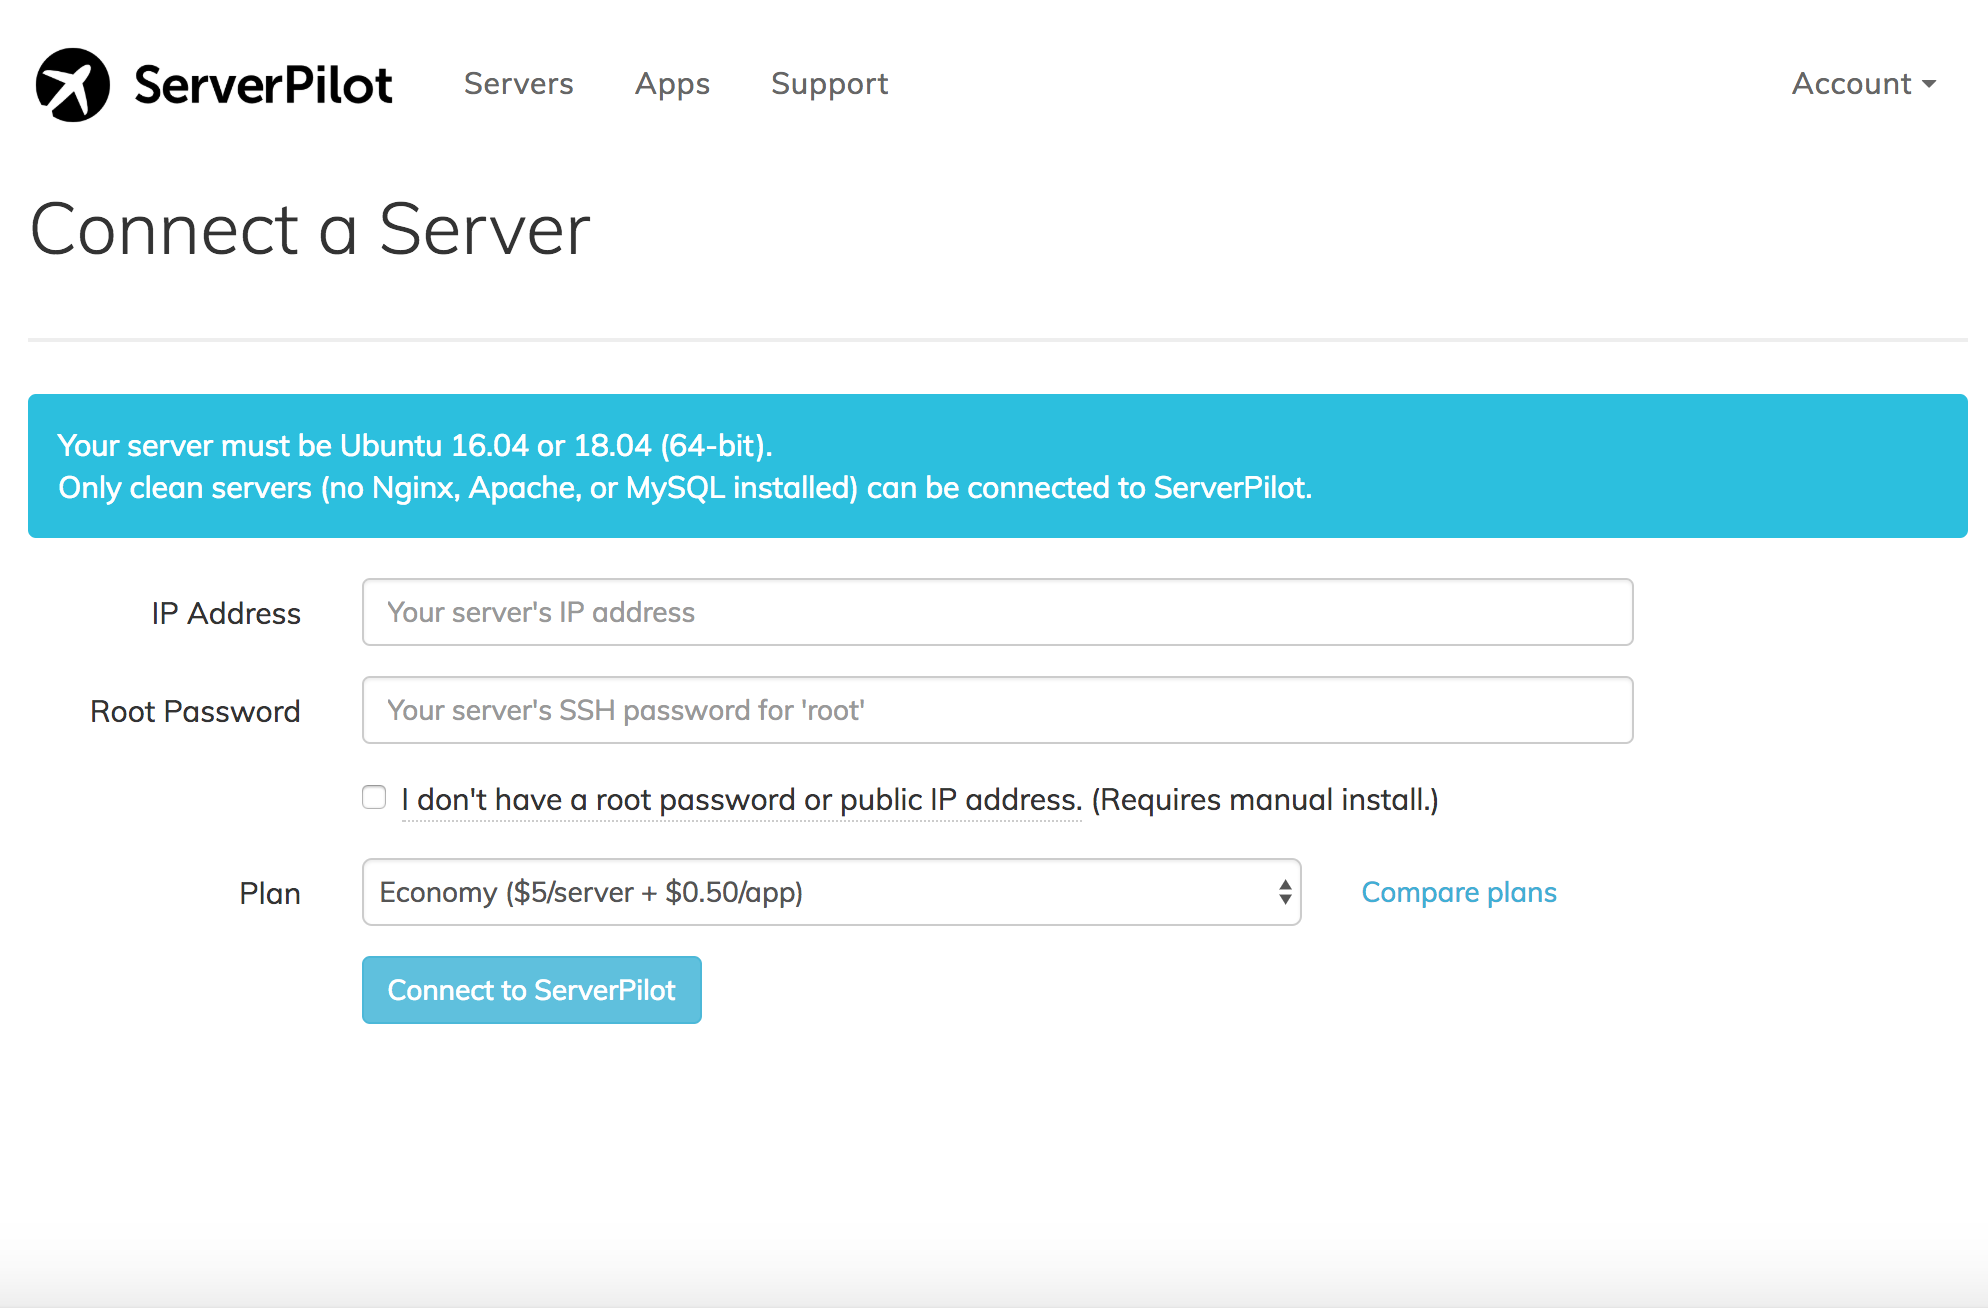 Connect your server to ServerPilot